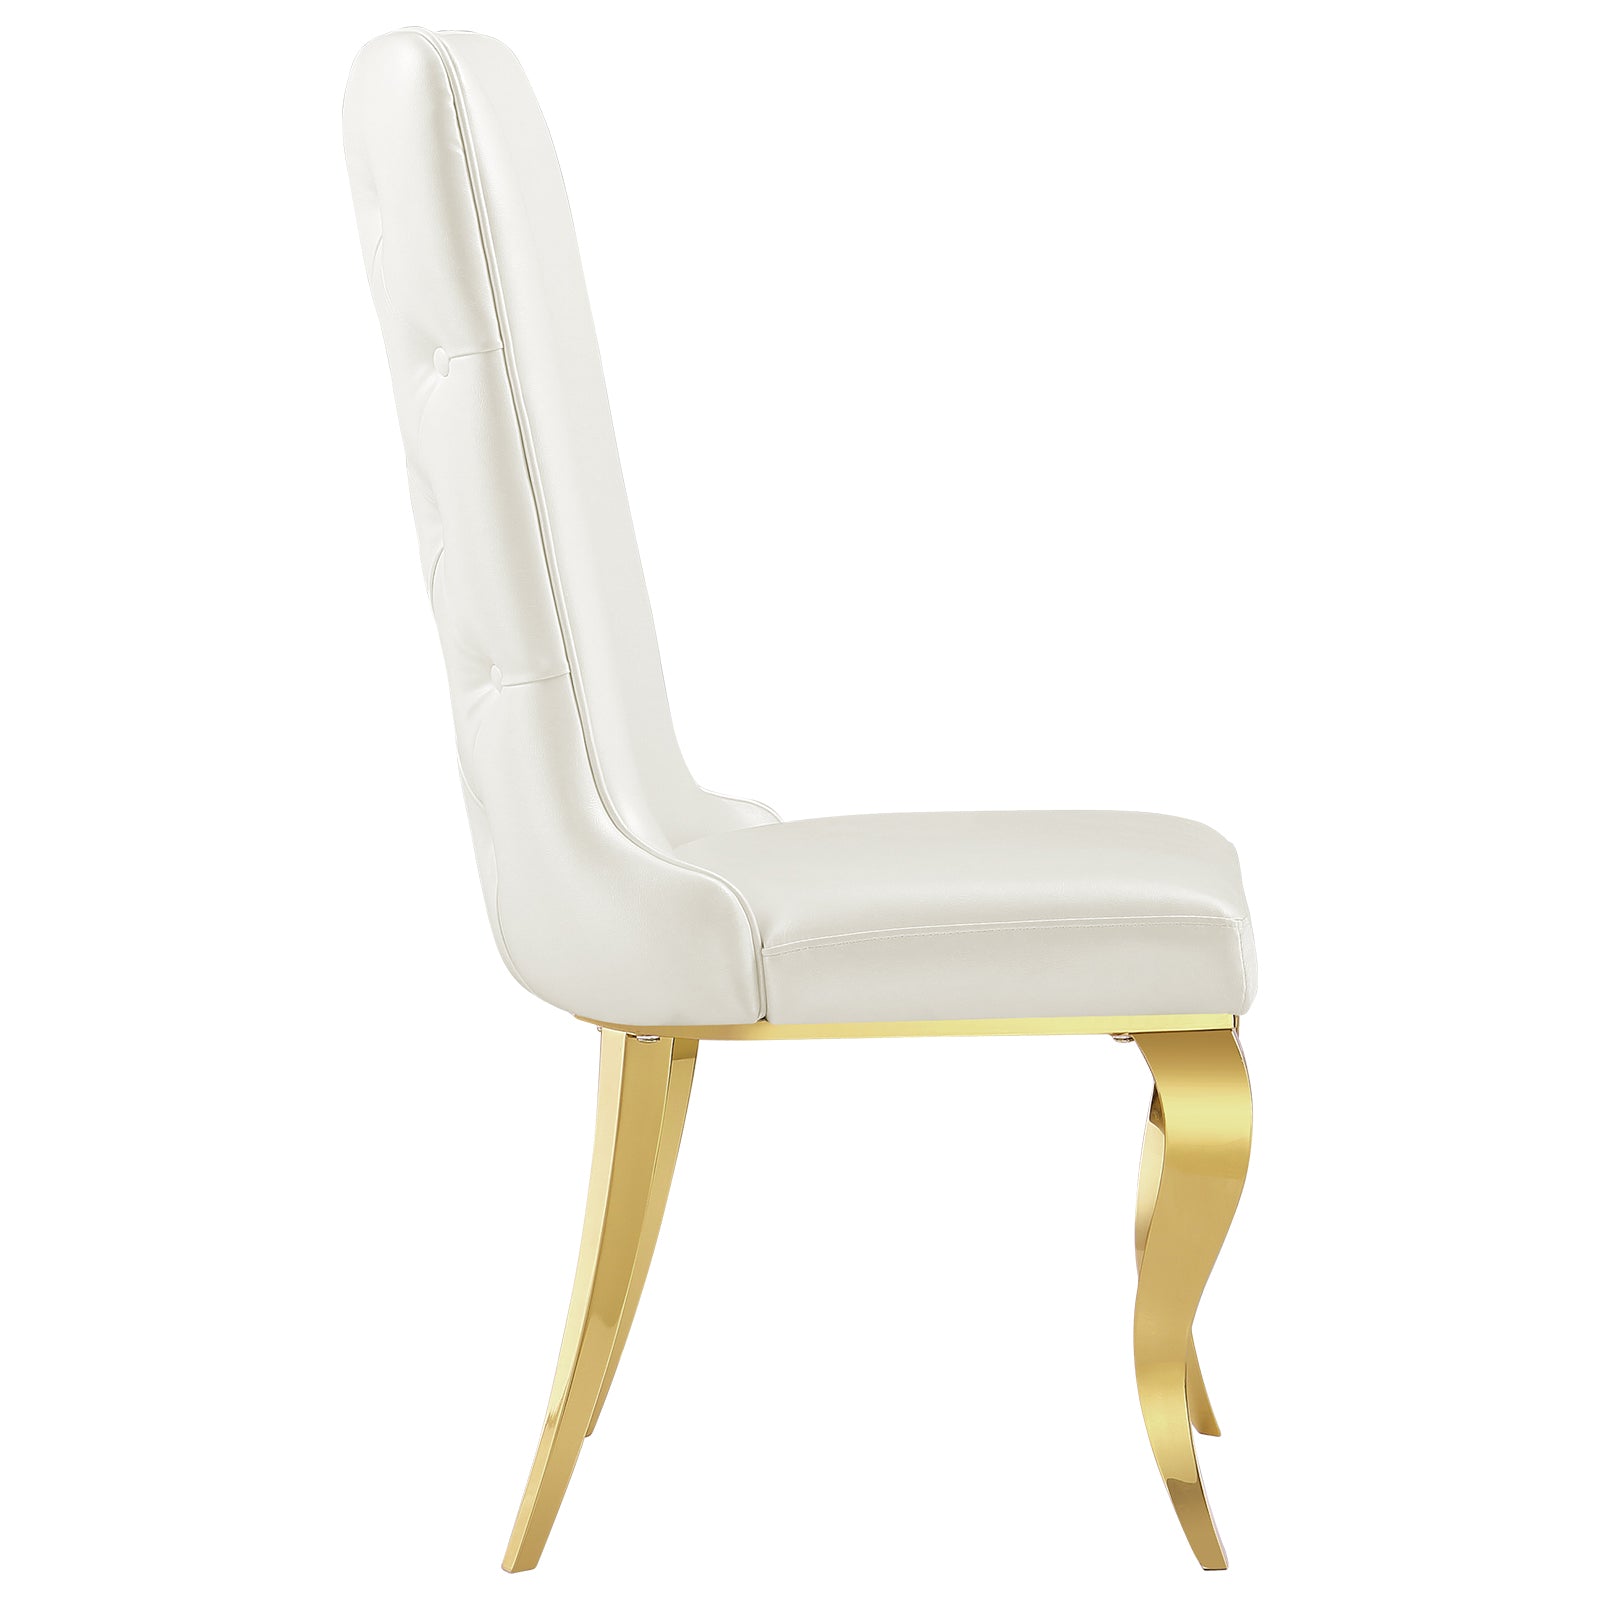 675-Set | AUZ White and Gold Dining room Sets for 6